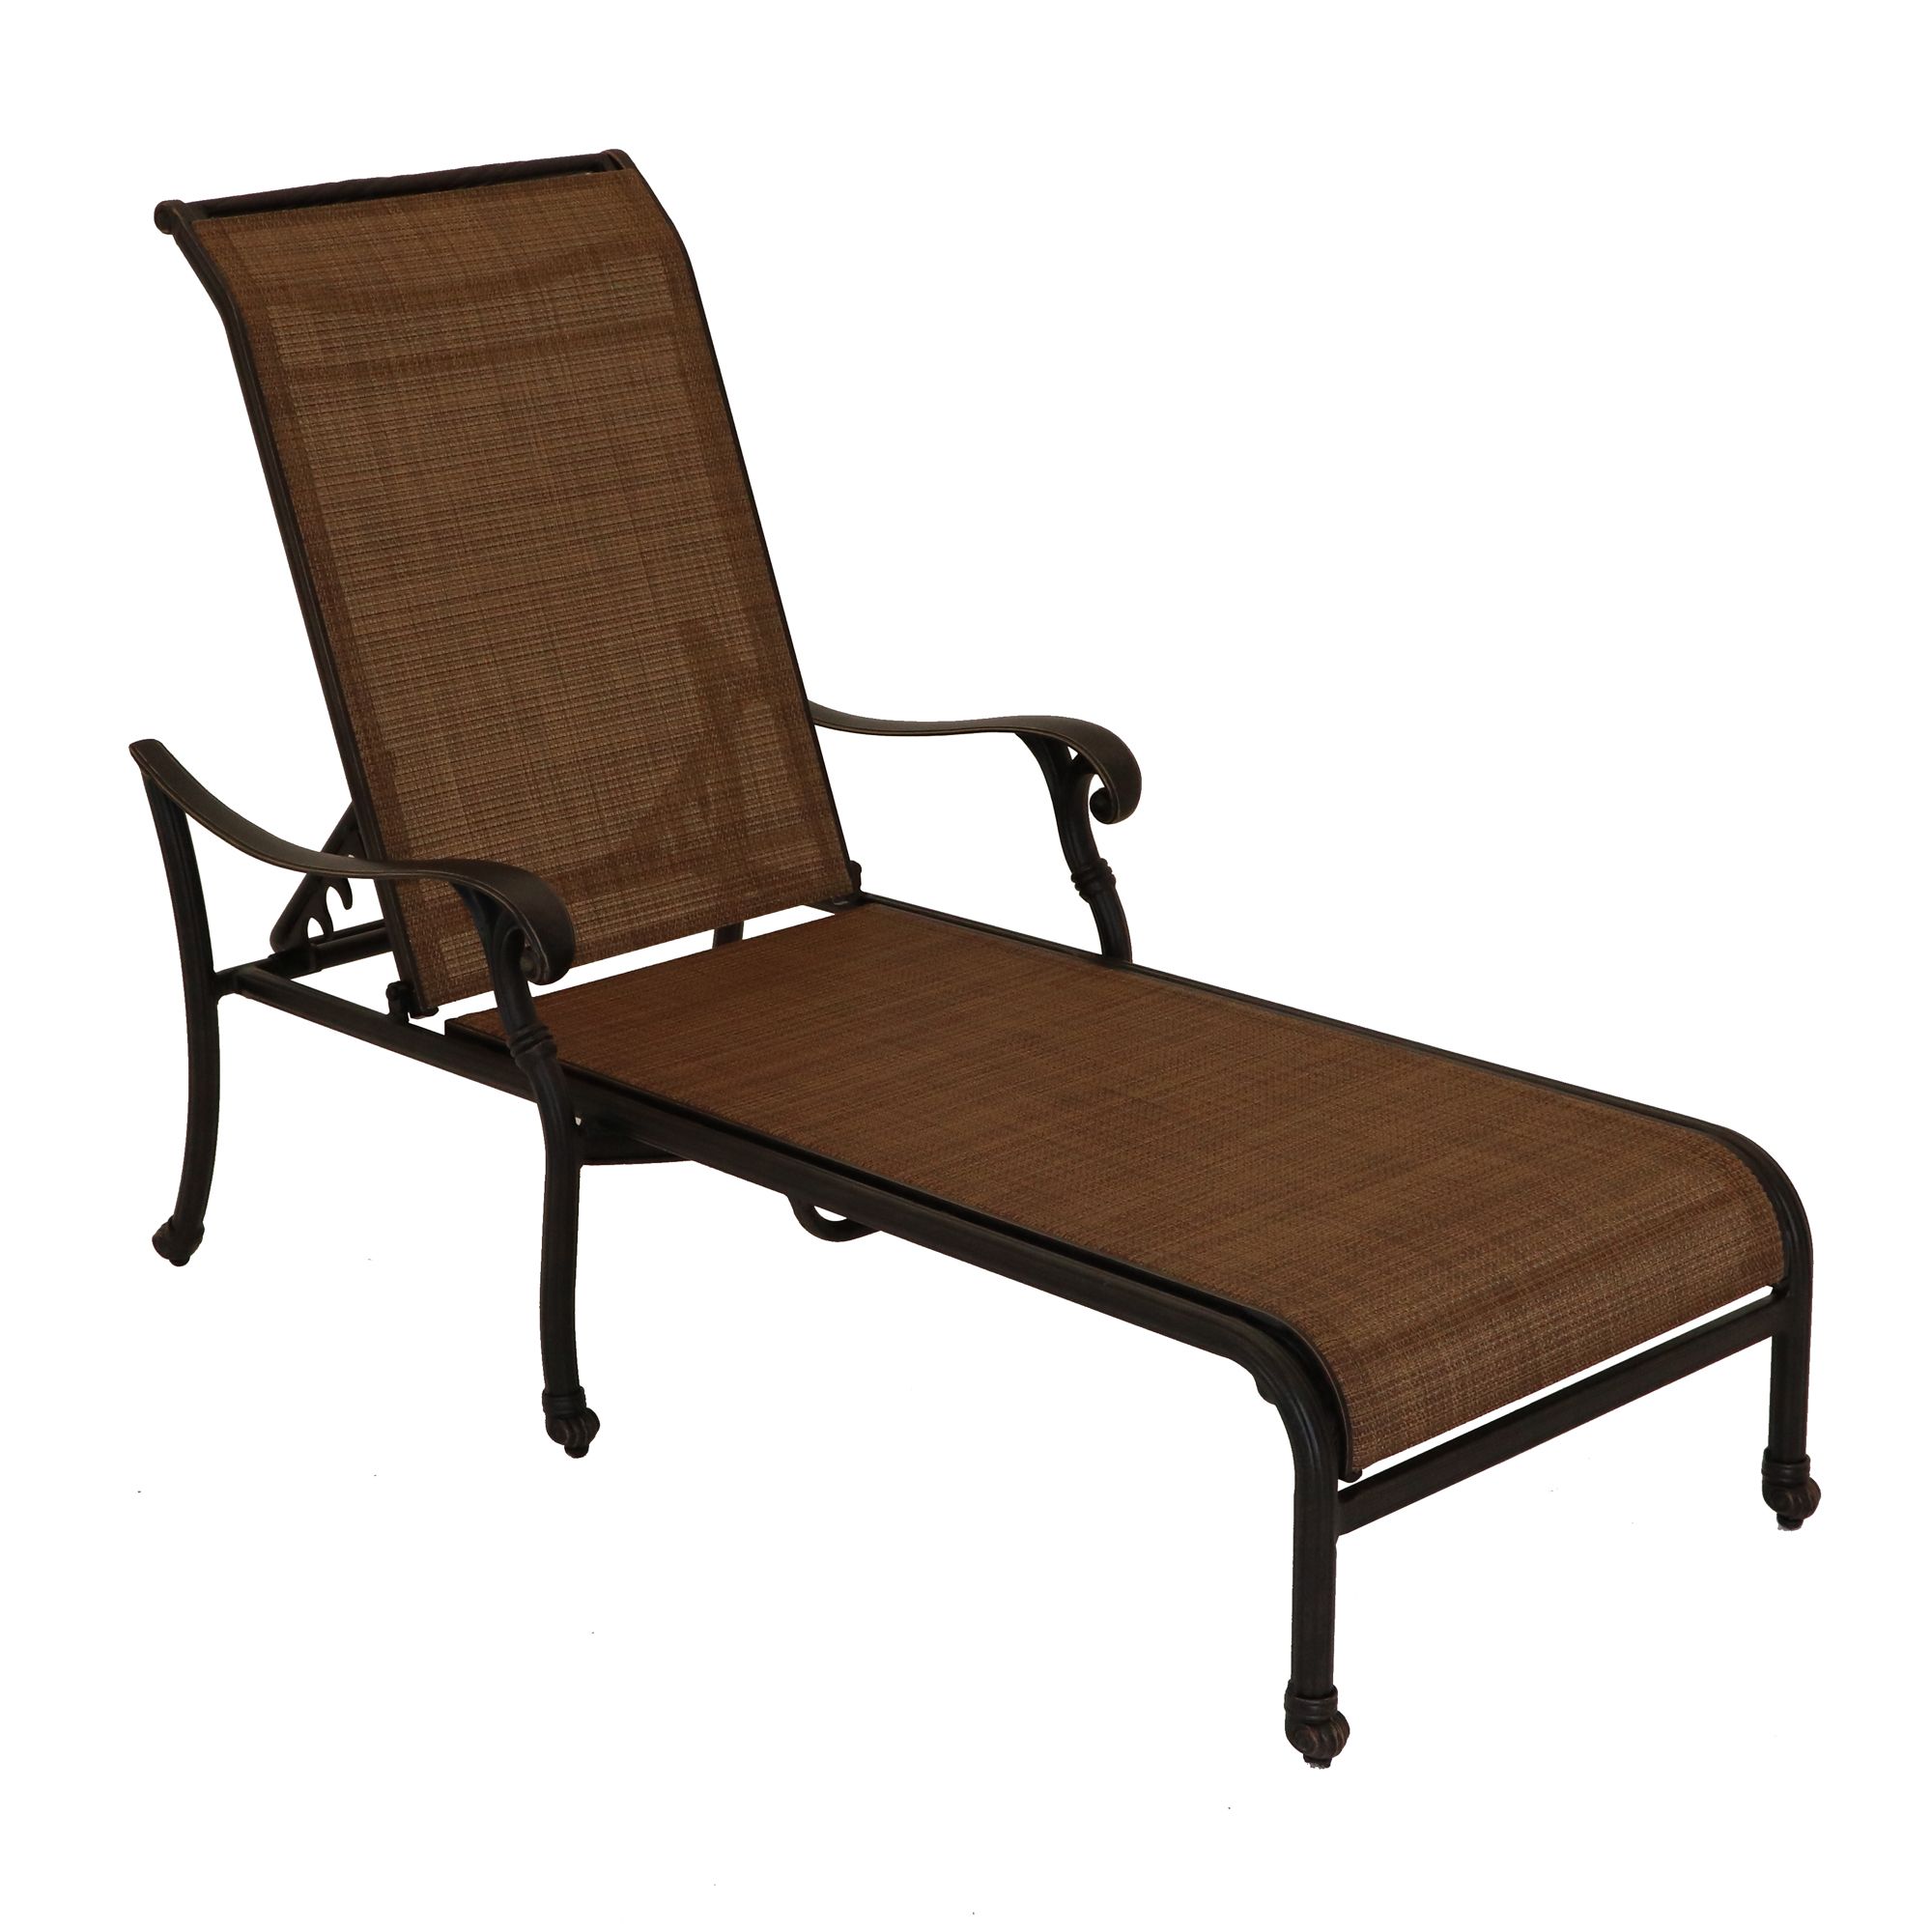 Newest Reclining Sling Chaise Lounges Pertaining To Castle Rock Sling Chaise Lounge (View 19 of 25)